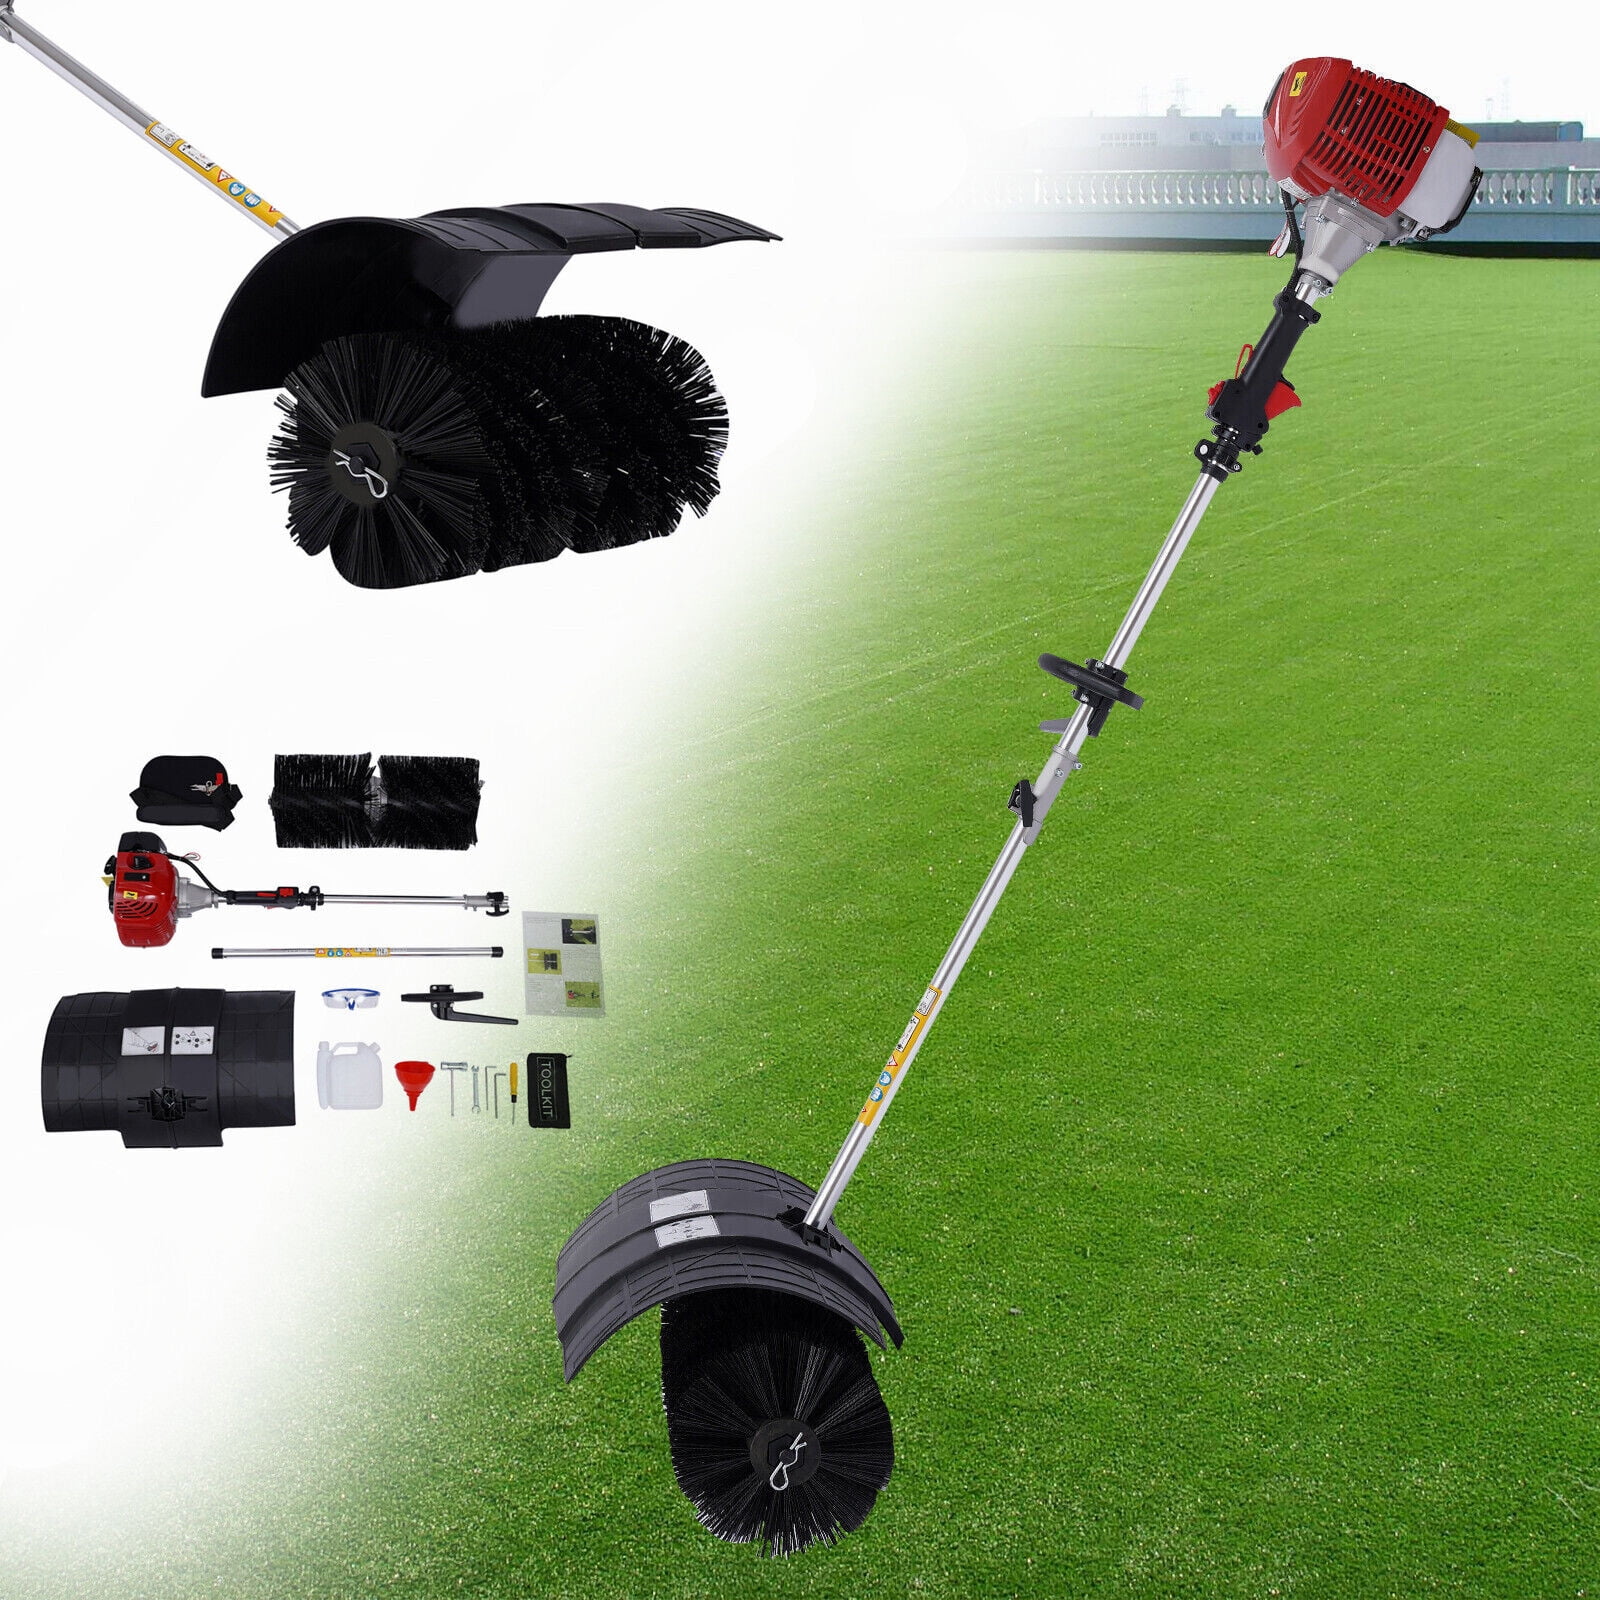 52cc GAS POWER HAND HELD CLEANING SWEEPER BROOM DRIVEWAY TURF ARTIFICIAL GRASS 